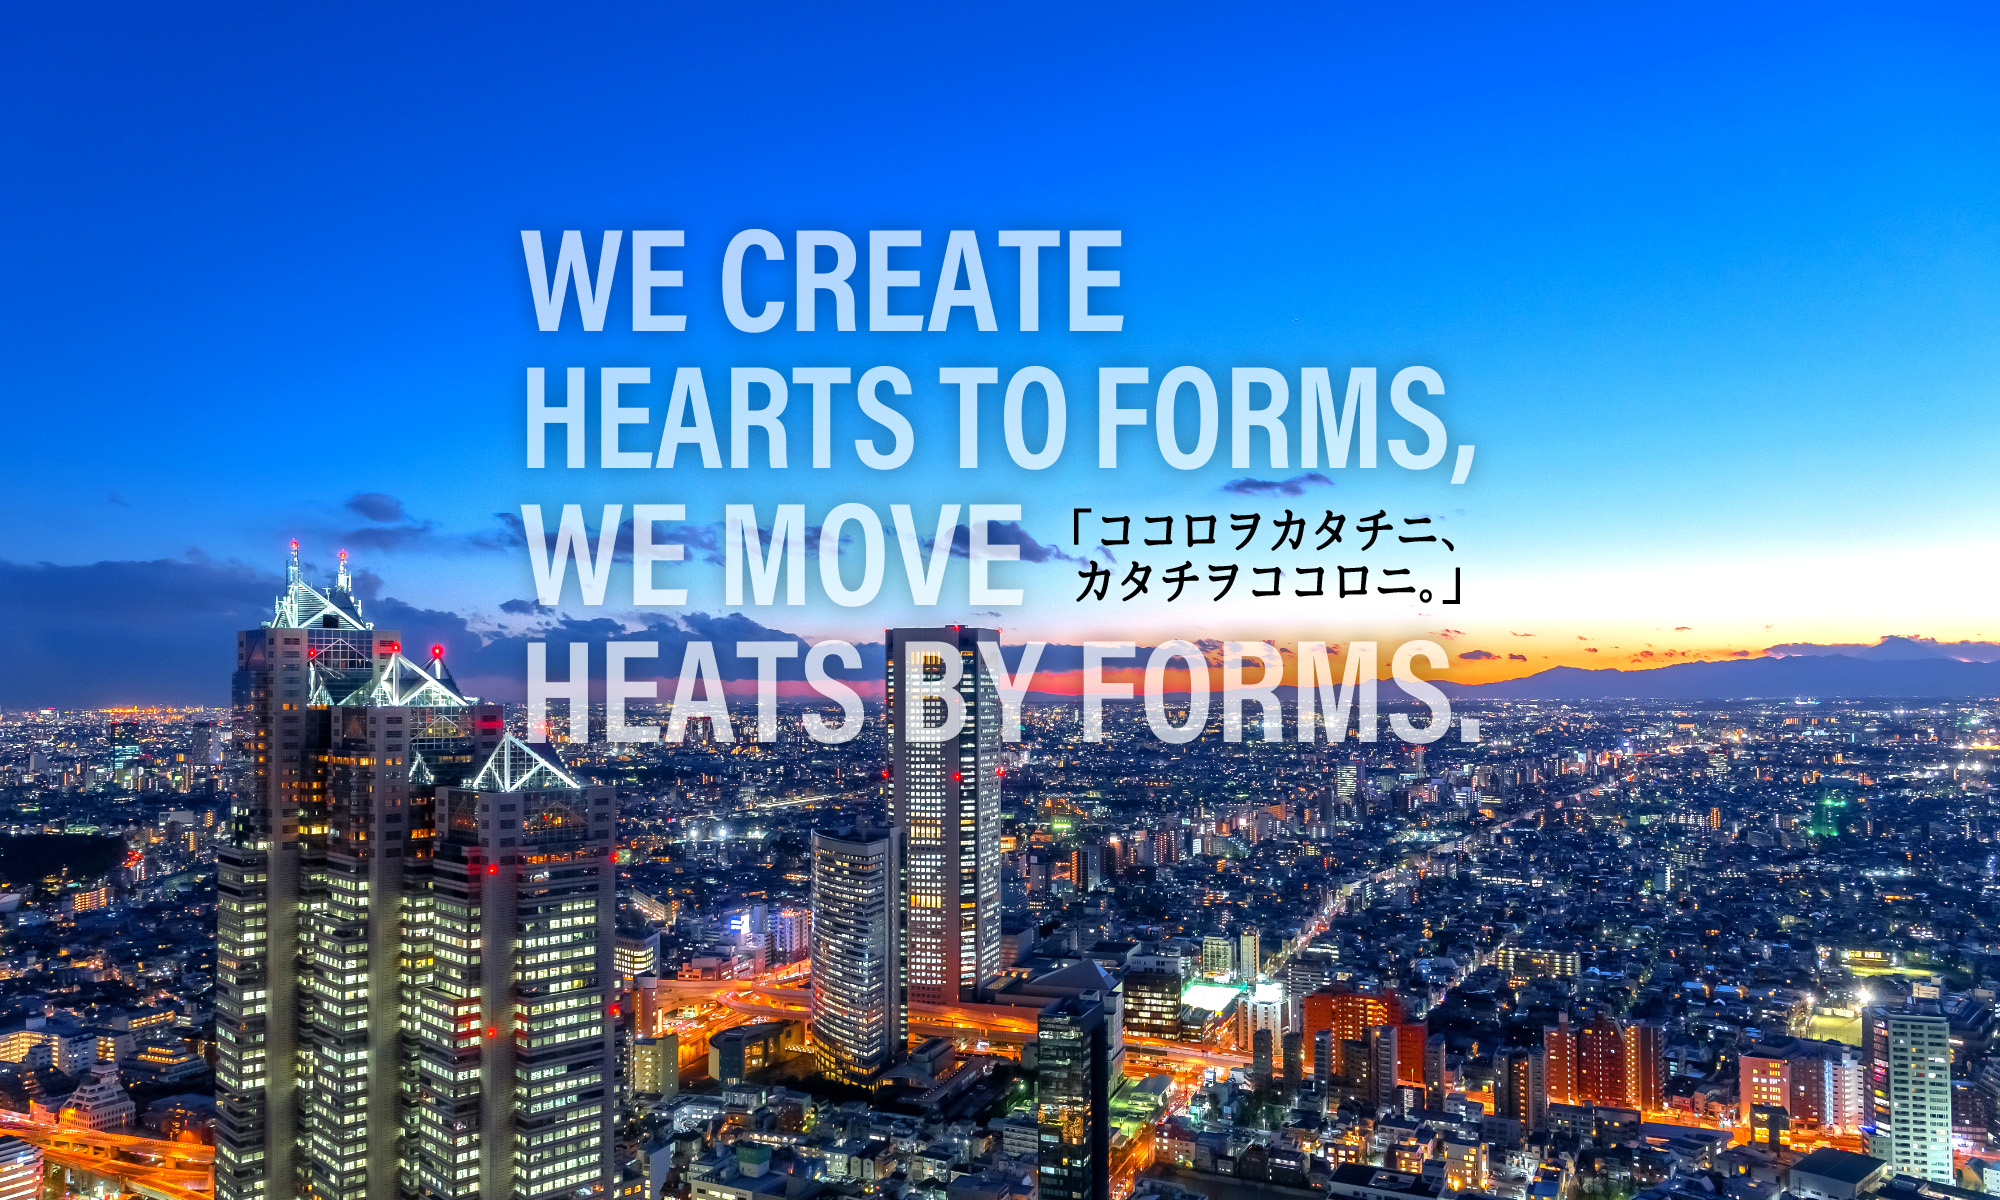 WE CREATE HEARTS TO FORMS, WE MOVE HEATS BY FORMS.ココロヲカタチニ、カタチヲココロニ。